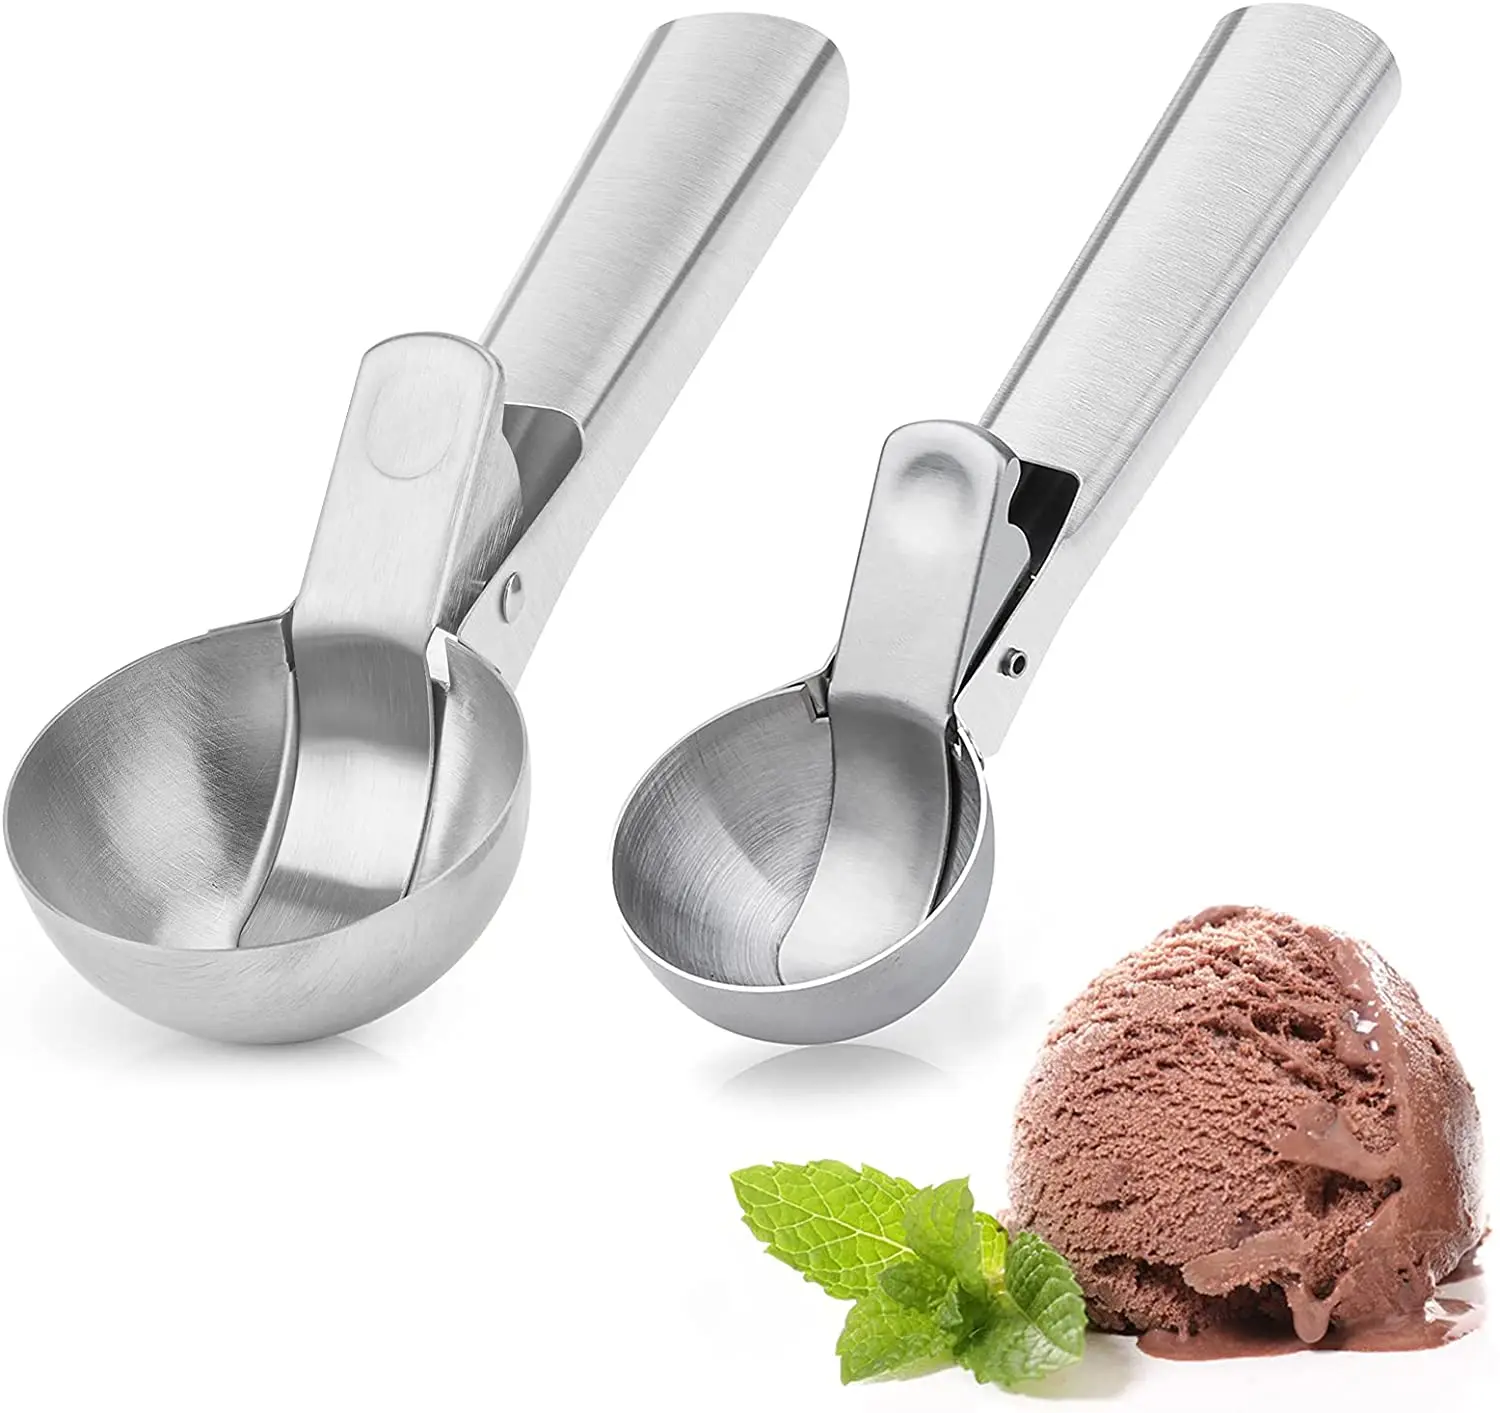 Stainless Steel Ice Cream Scooper with Trigger Release - Brilliant